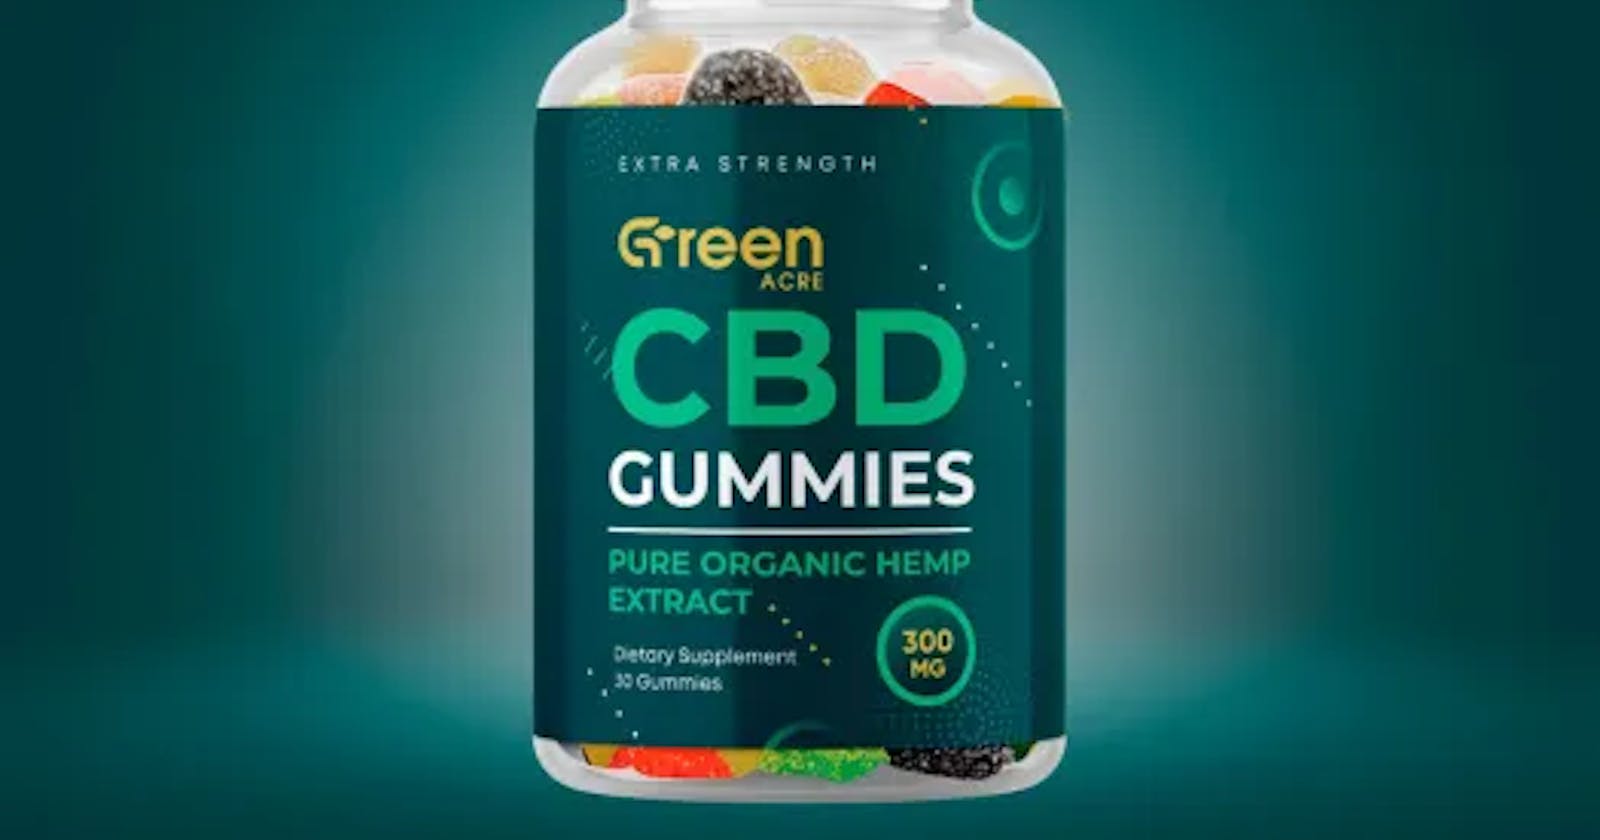 Green Acre CBD Gummies Reviews [TOP RATED] Scam? EXPOSED Ingredients & Where to Buy